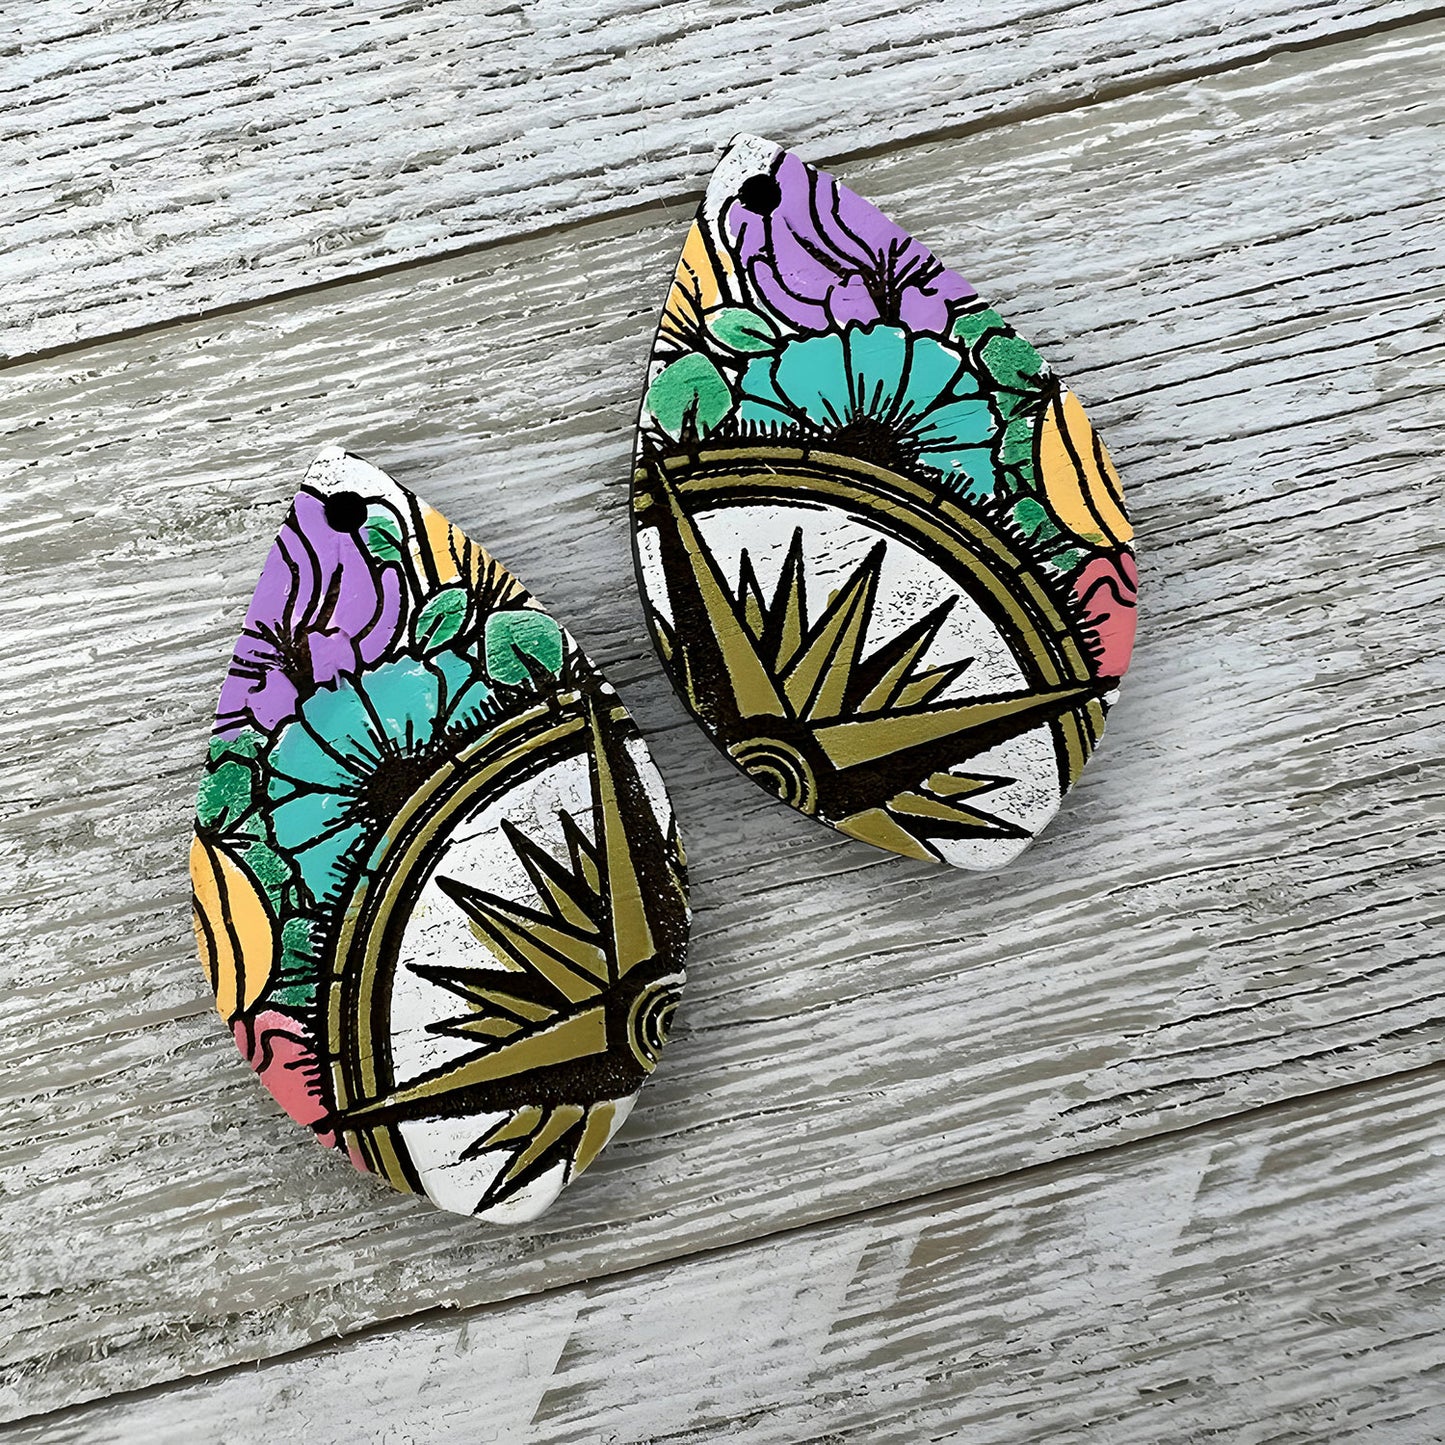 Floral Nautical-Themed Teardrop Earrings - "Compass and Flowers"